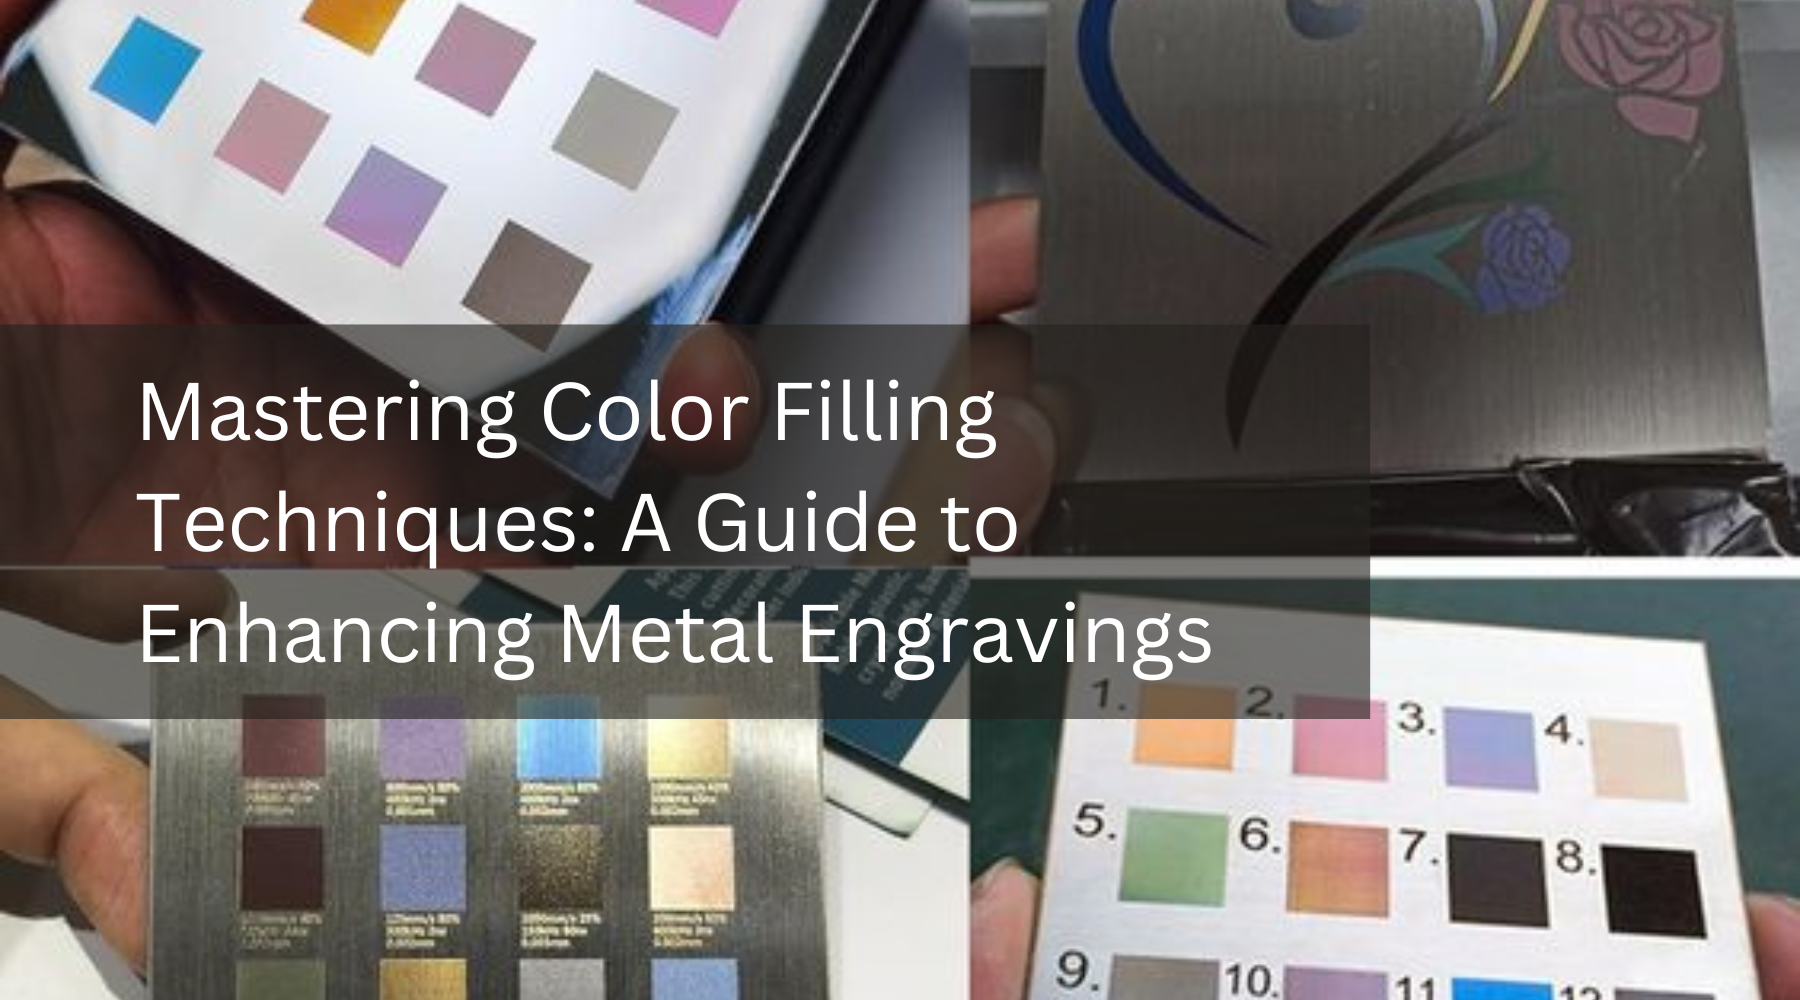 Mastering Color Filling Techniques: A Guide to Enhancing Metal Engravings